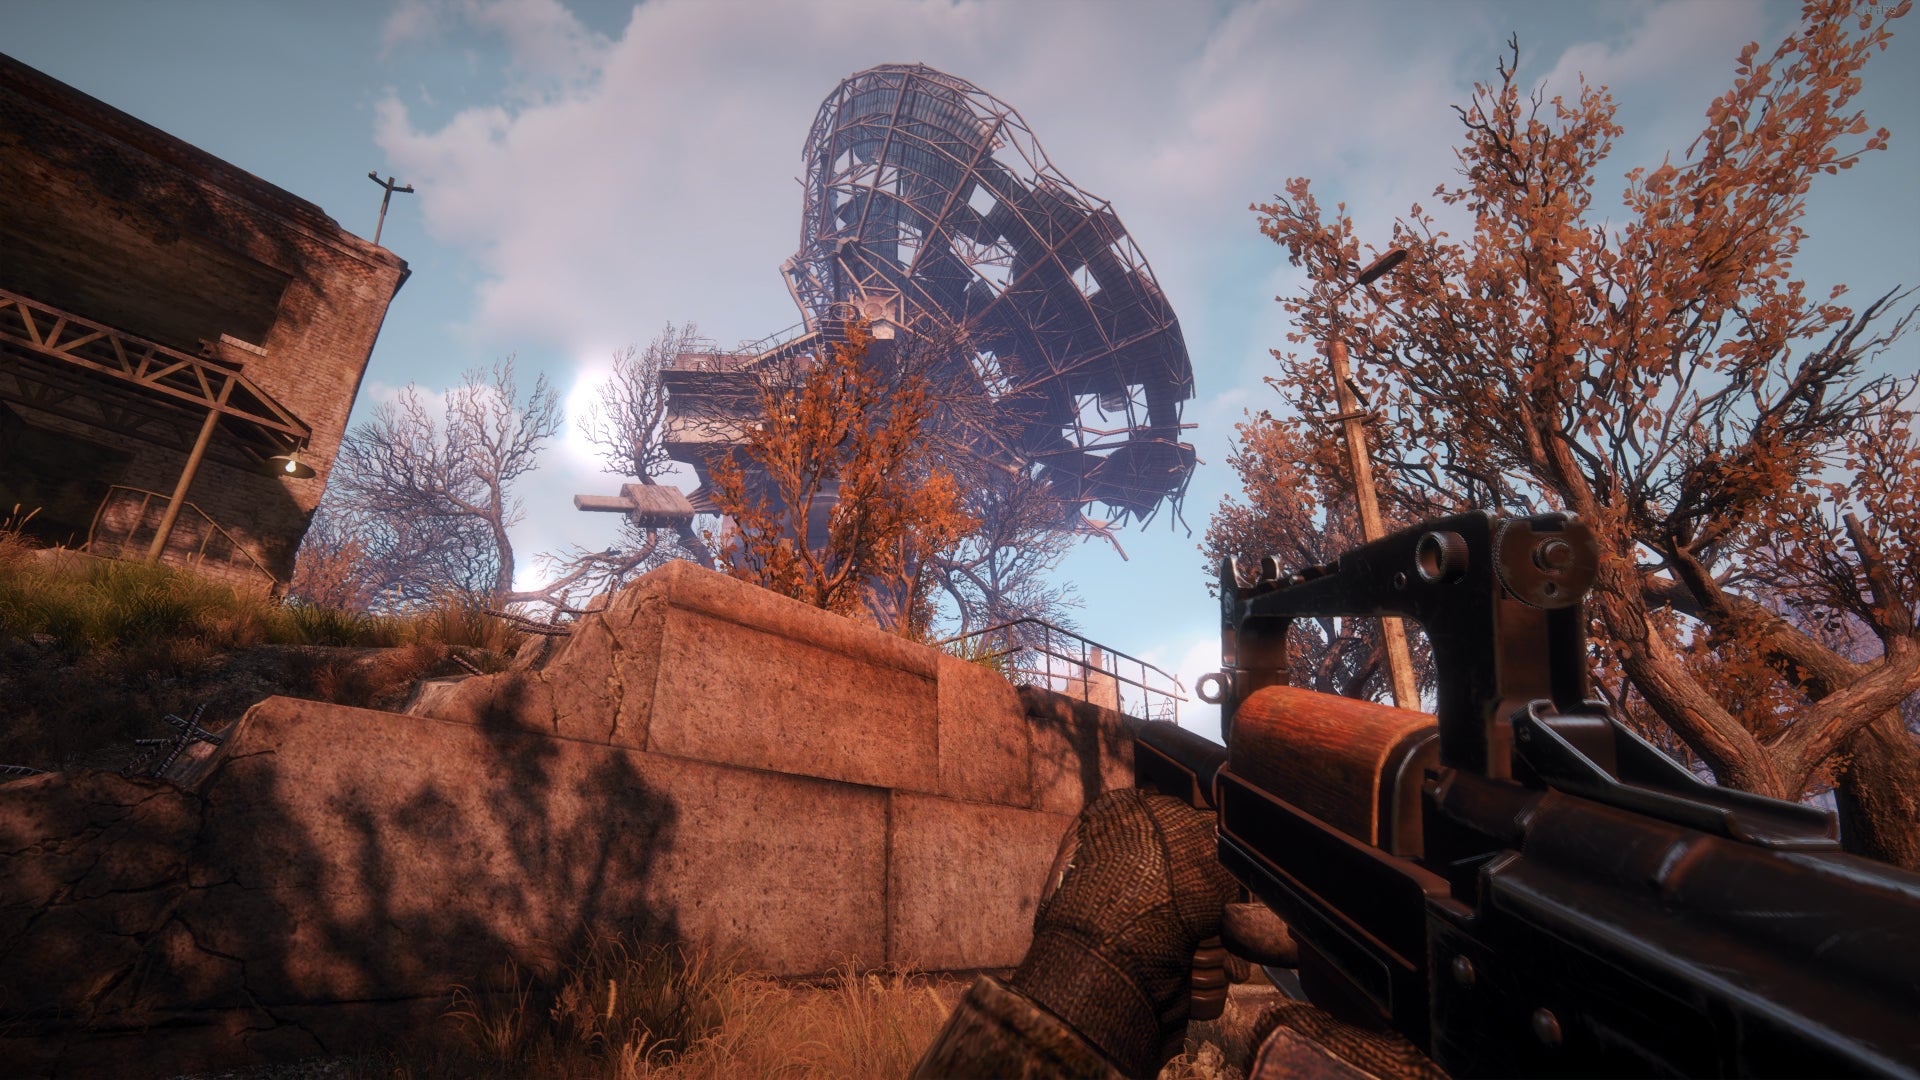 A big, ruined, satellite dish in the exclusion zone of Survarium, viewed from a first-person perspective.